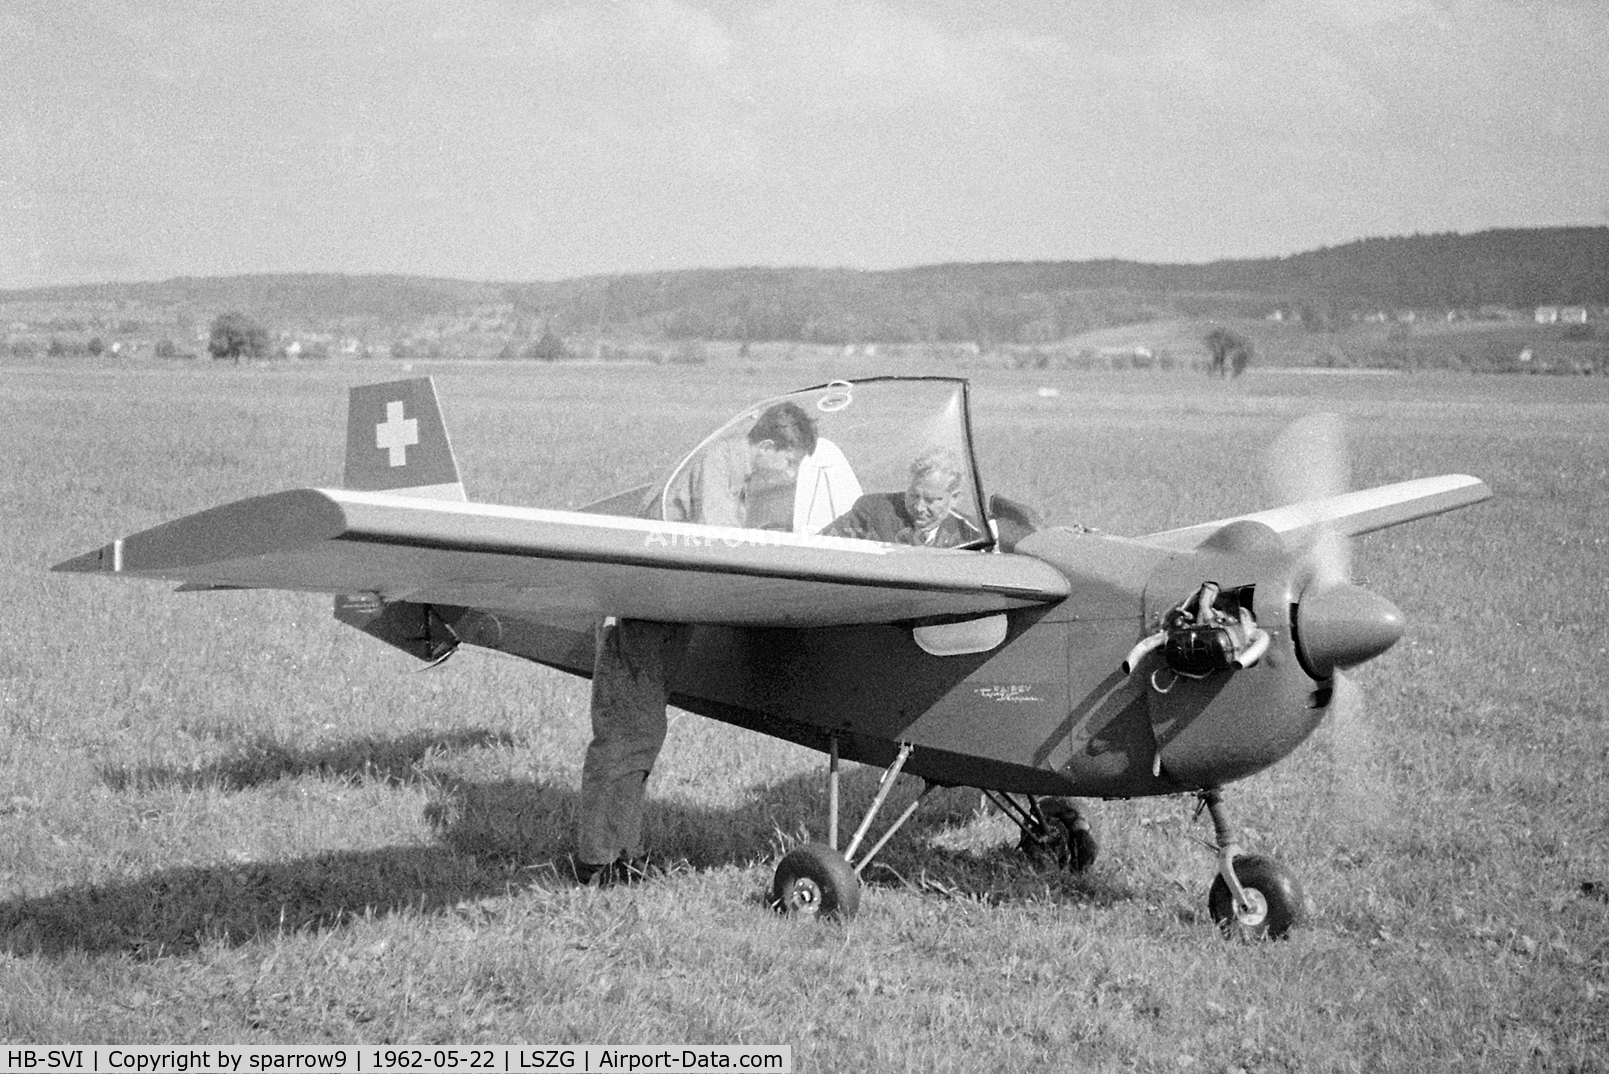 HB-SVI, 1960 Tipsy T.66 Nipper 2 C/N 53, Grenchen in the sixties. Scanned from a b+w negative.